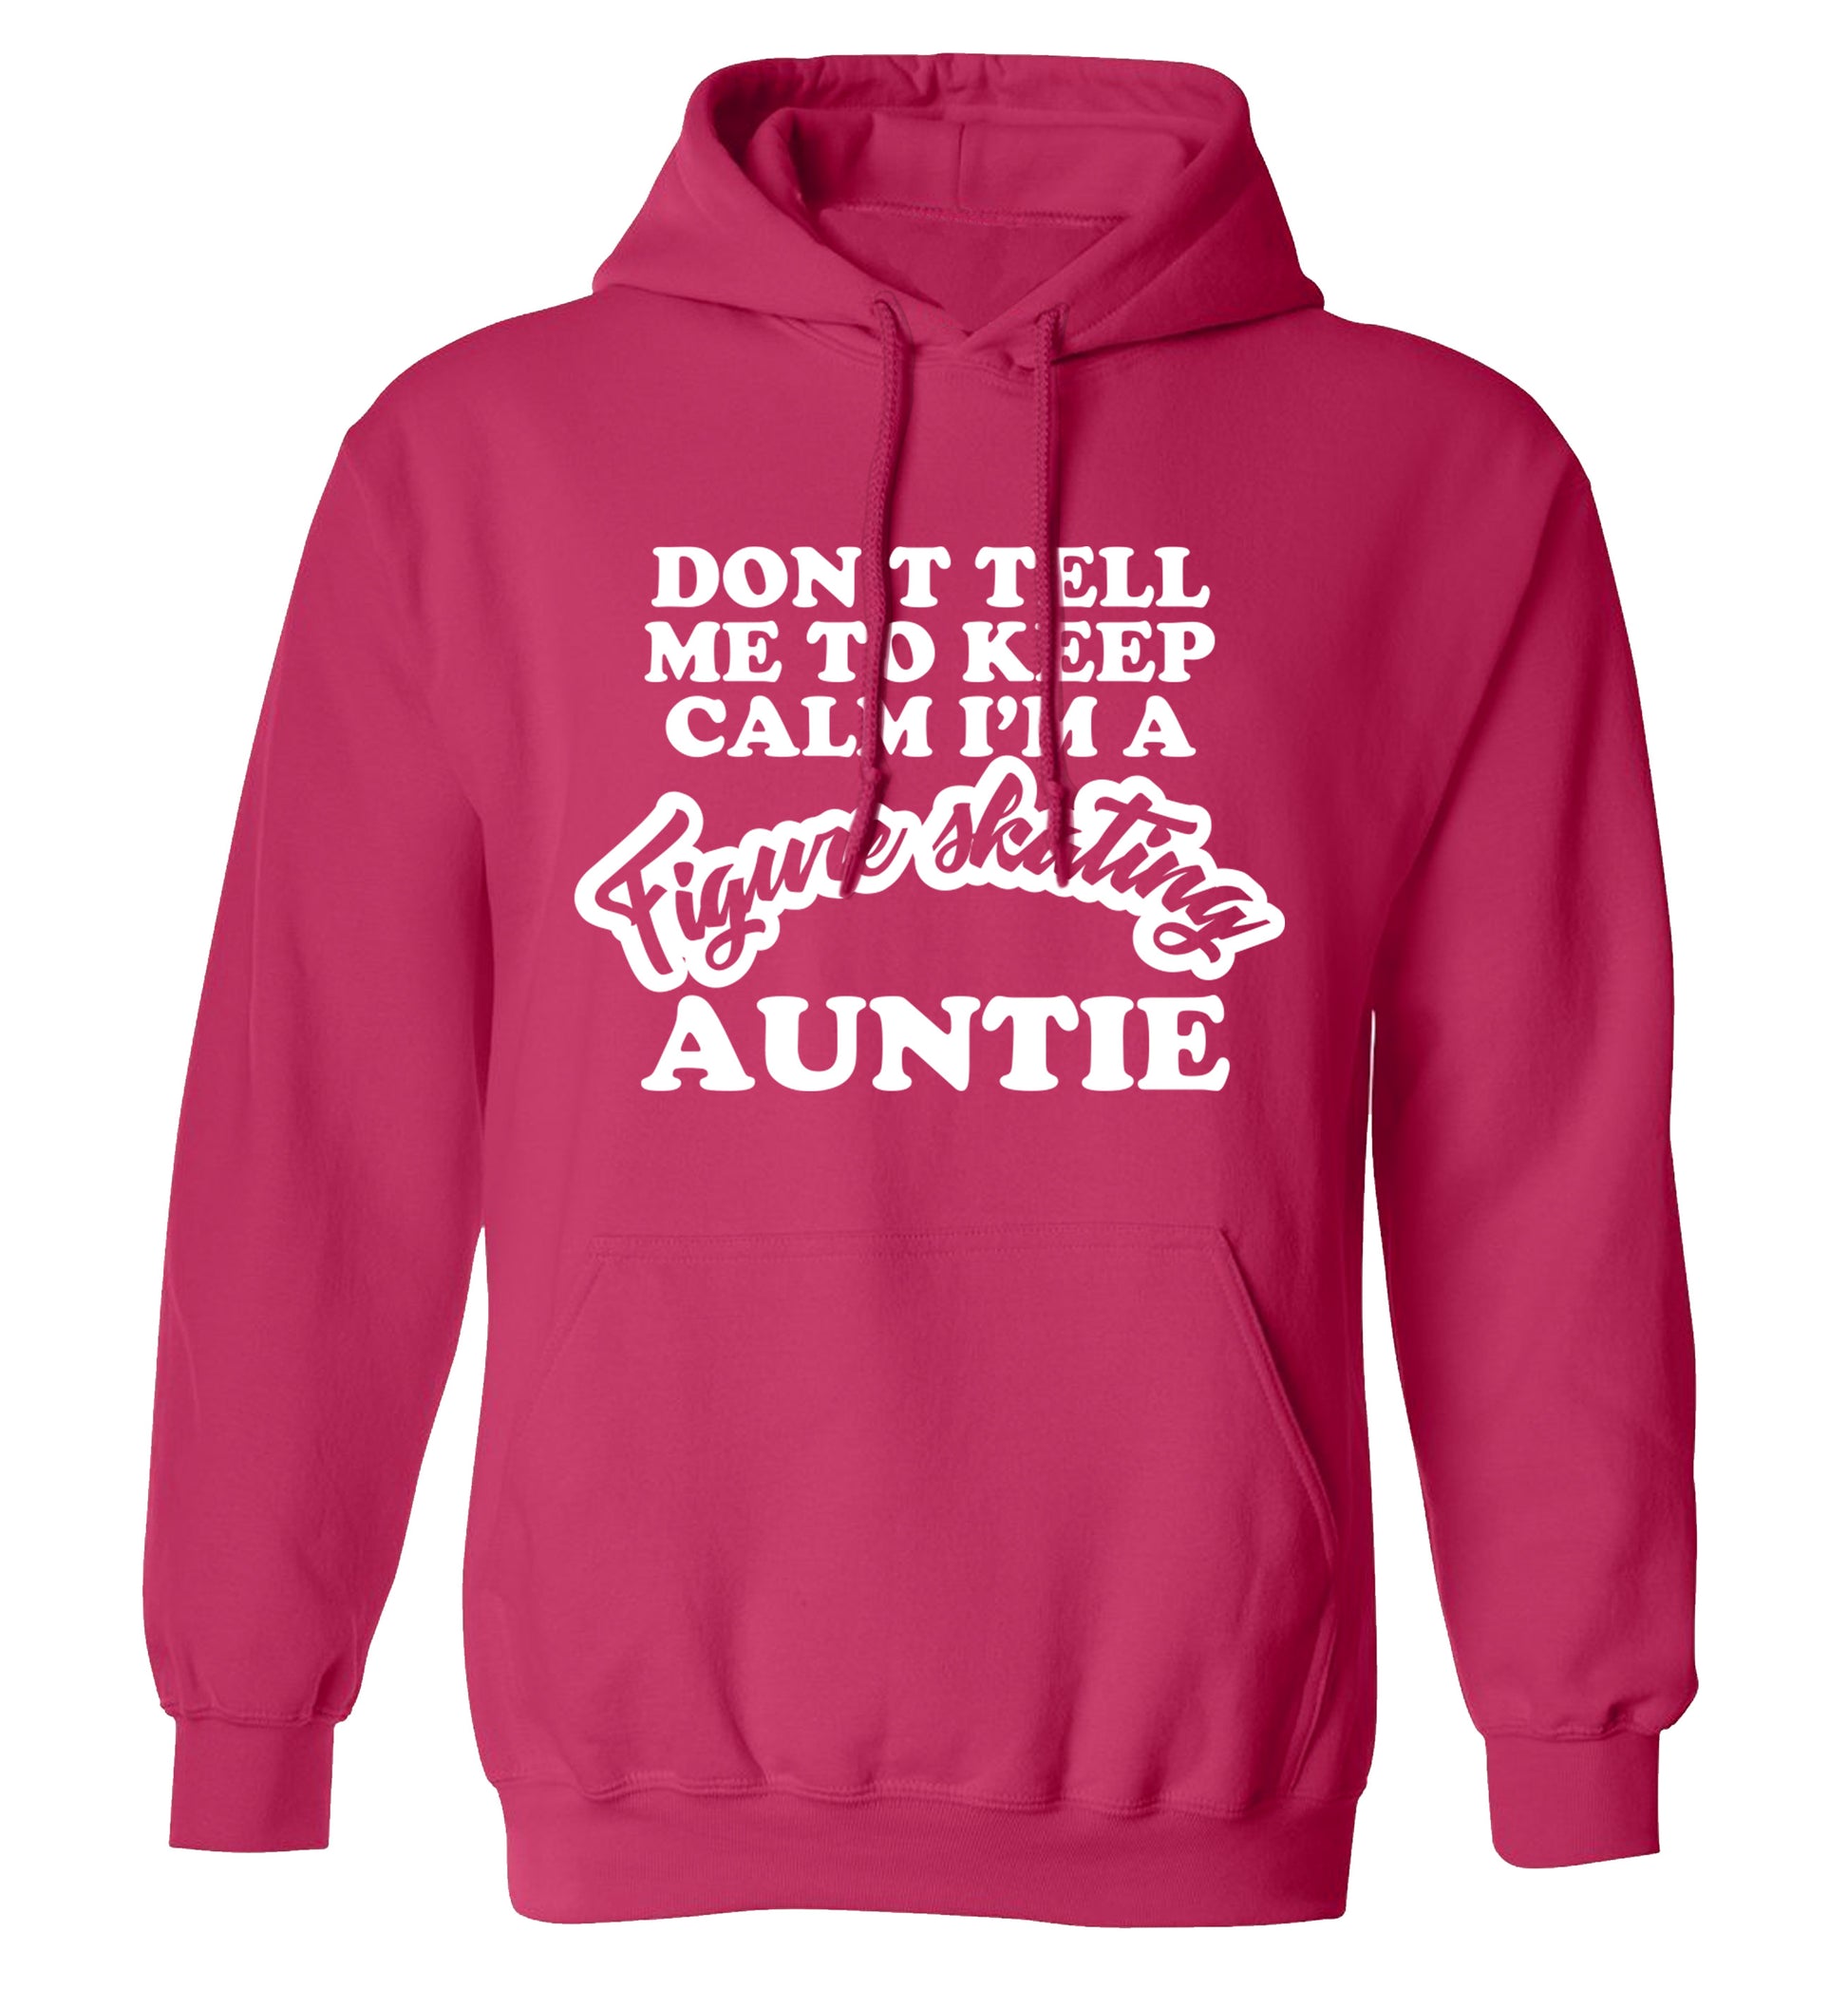 Don't tell me to keep calm I'm a figure skating auntie adults unisexpink hoodie 2XL